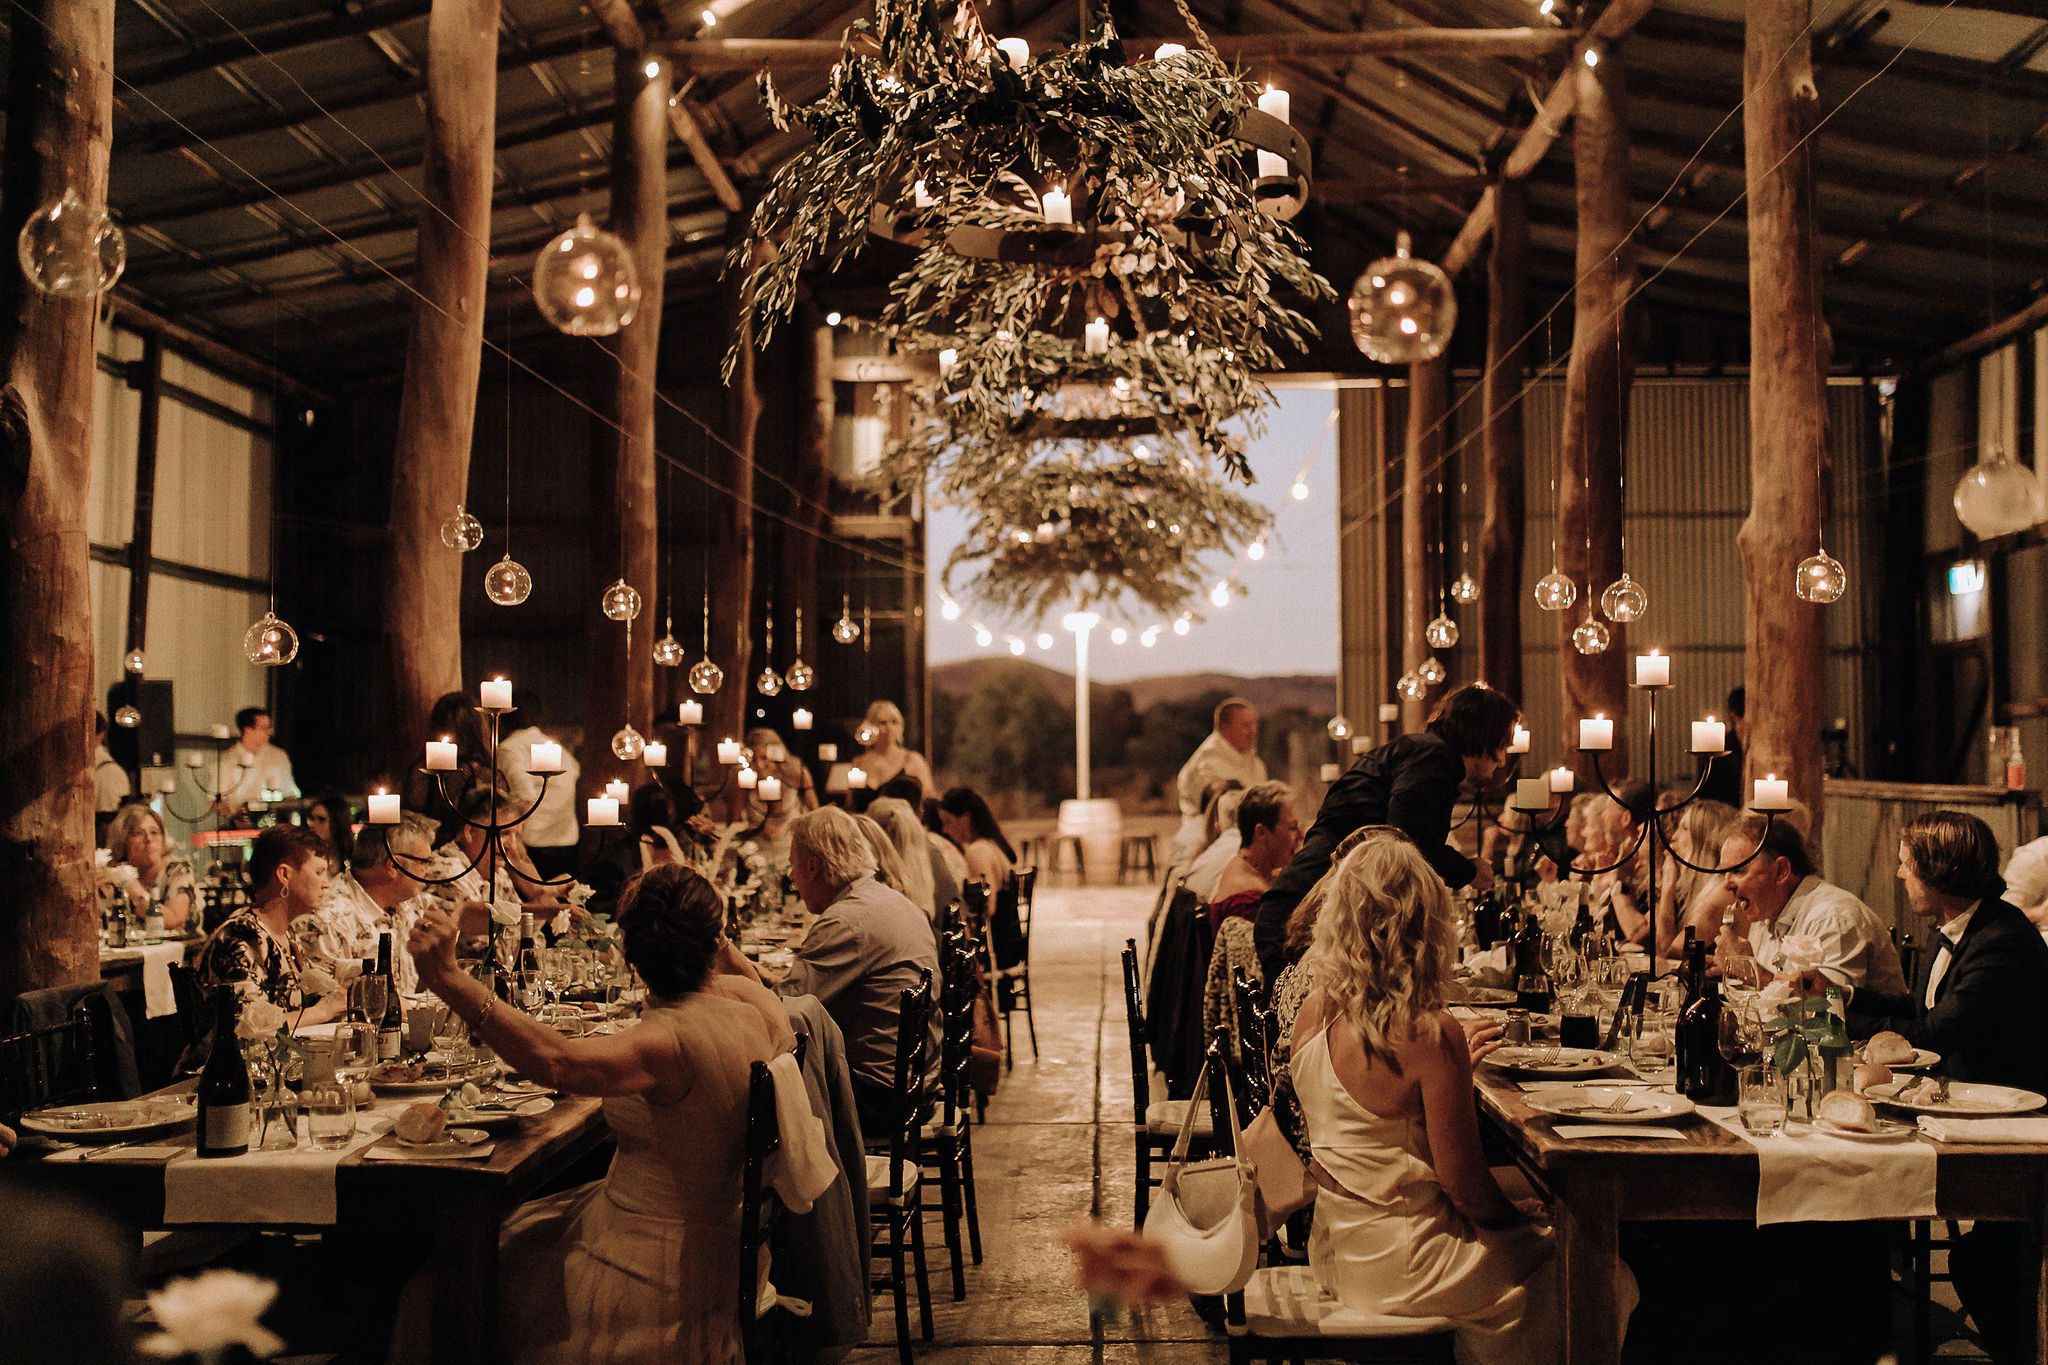 A beautiful wedding reception with flowers and guests enjoying a meal. Flowers hanging from the roof and candles lighting the reception